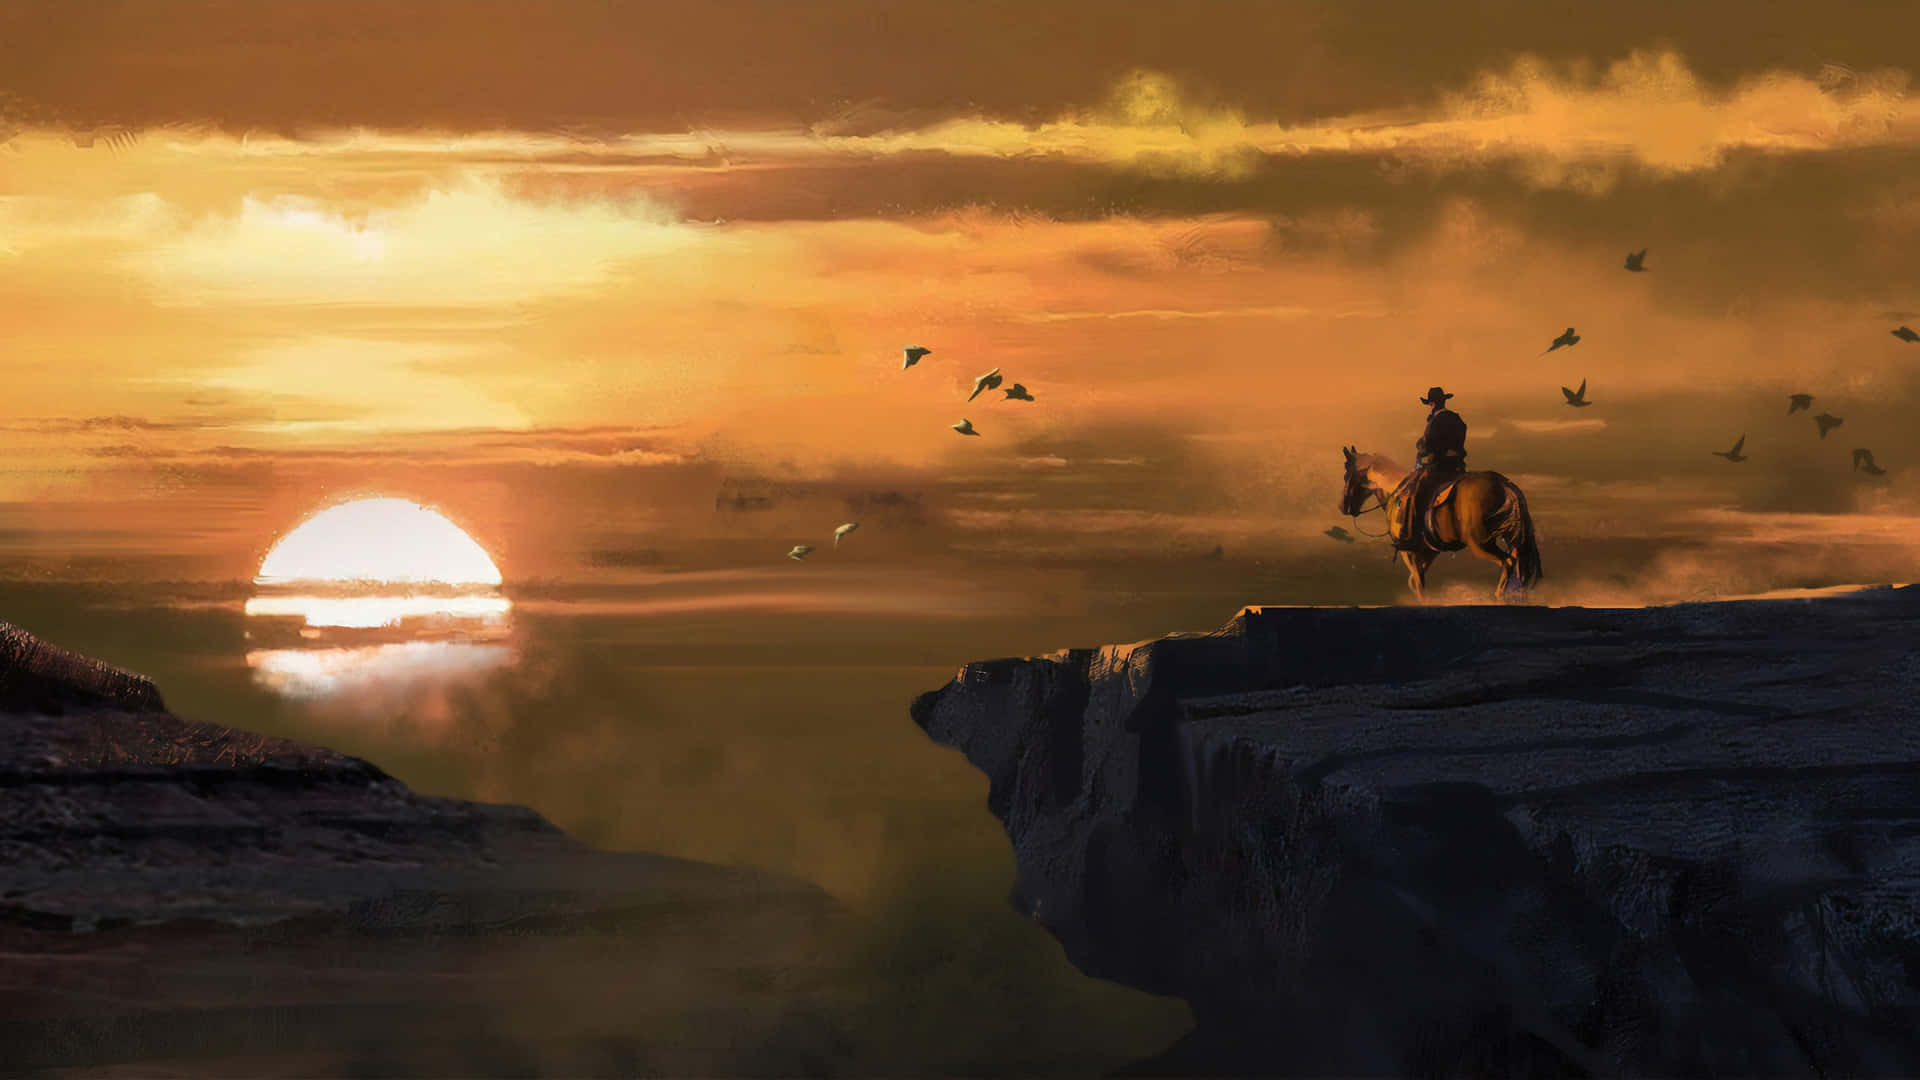 Best Red Dead Redemption 2 Cowboy Looking At The Sunset Background